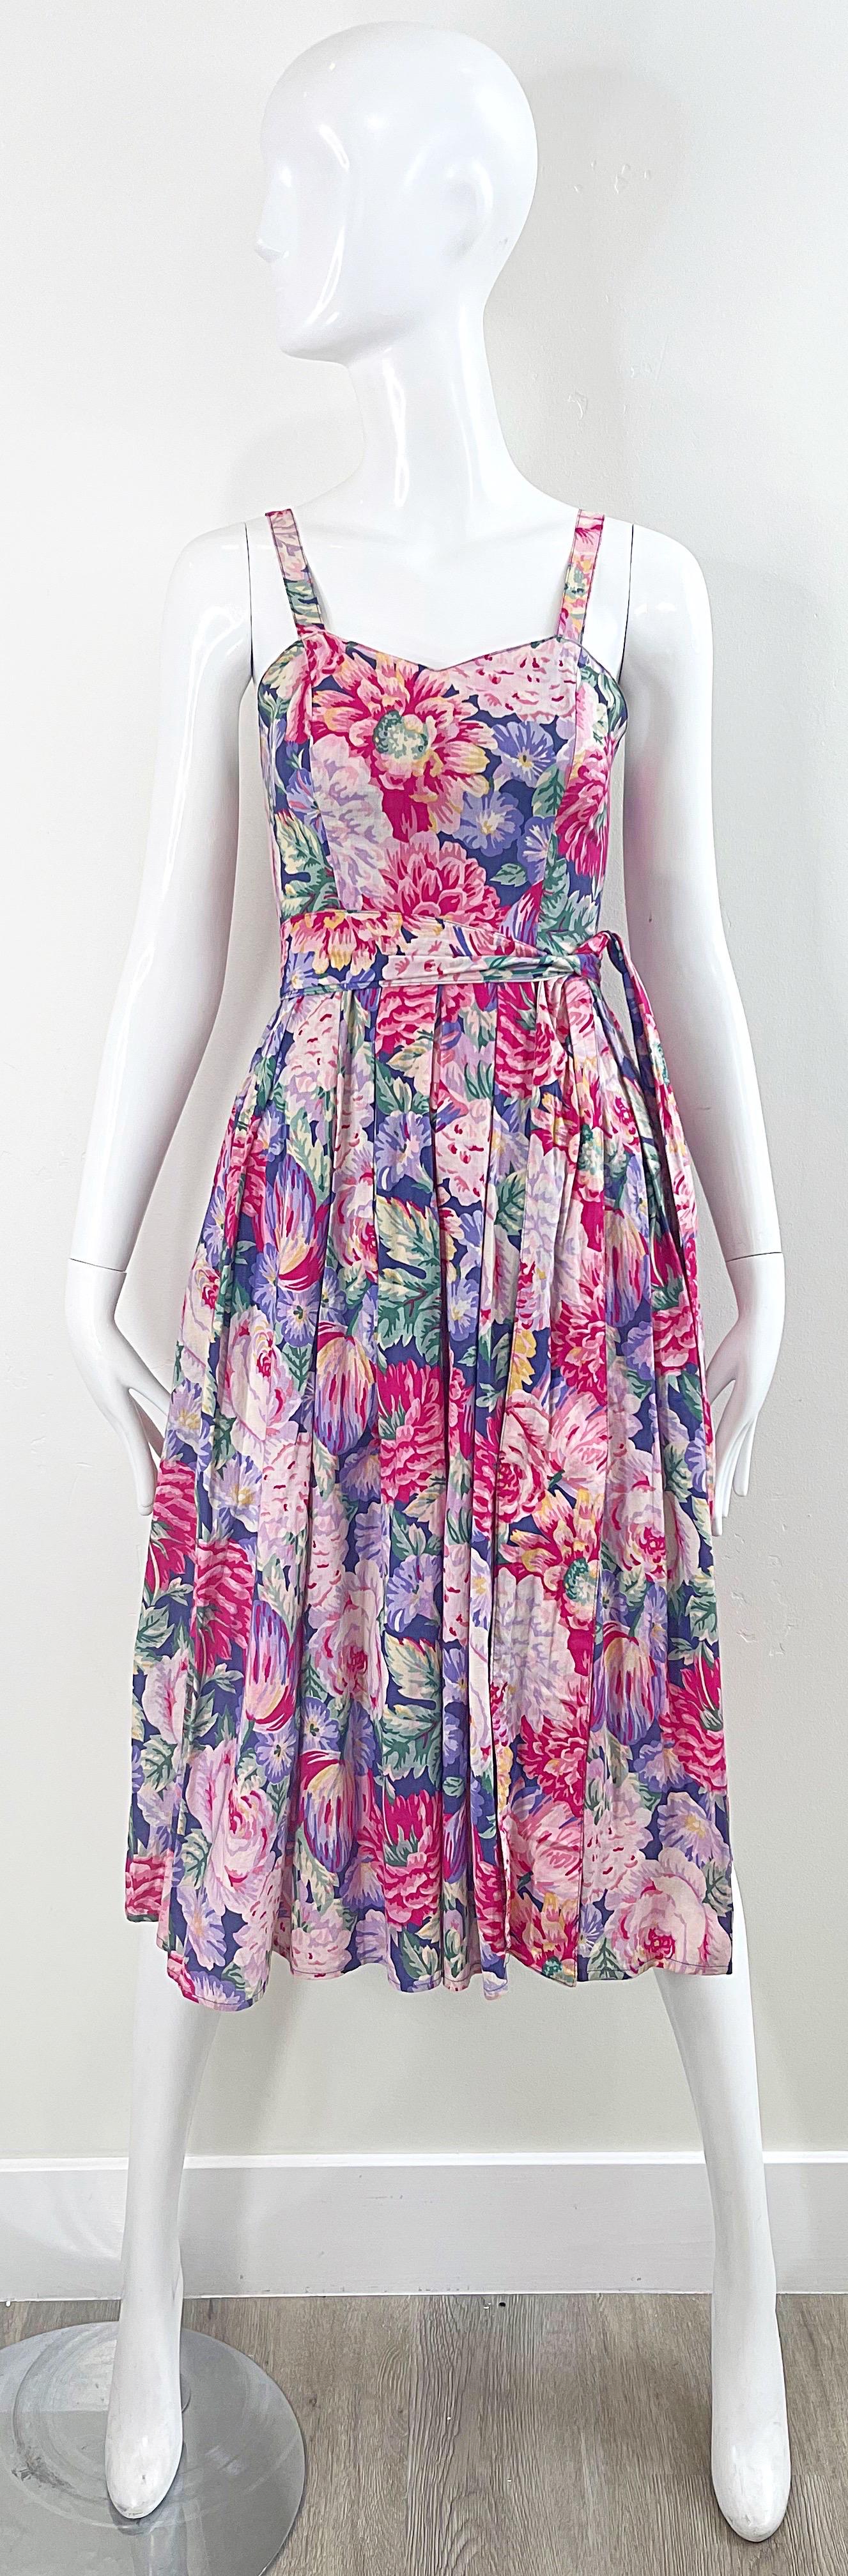 Chic and pretty early 80s does 50s LAURA ASHLEY sleeveless cotton floral dress ! Features large printed flowers in purple, pink, green, yellow and white. Detachable matching belt. Pockets at each side of the hips. Hidden zipper up the back with